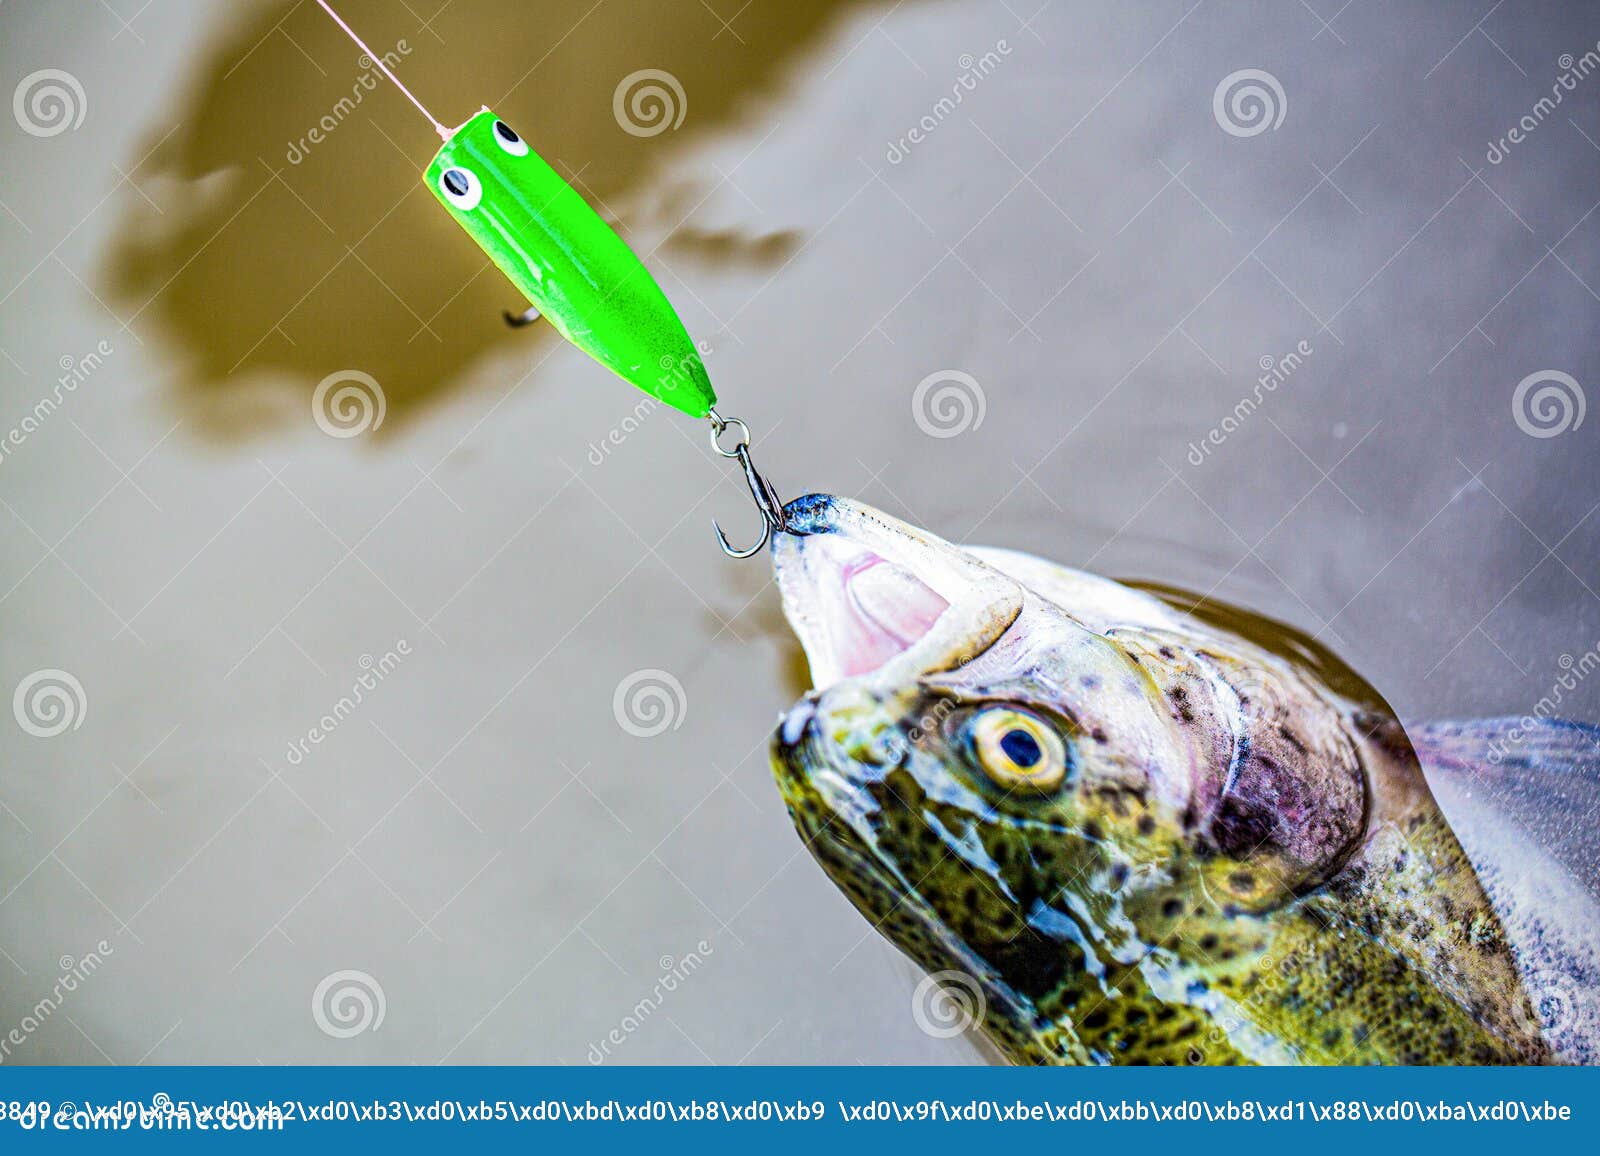 https://thumbs.dreamstime.com/z/close-up-shut-fish-hook-fisherman-trouts-spinning-fishing-trout-lakes-brook-rainbow-still-water-277328849.jpg